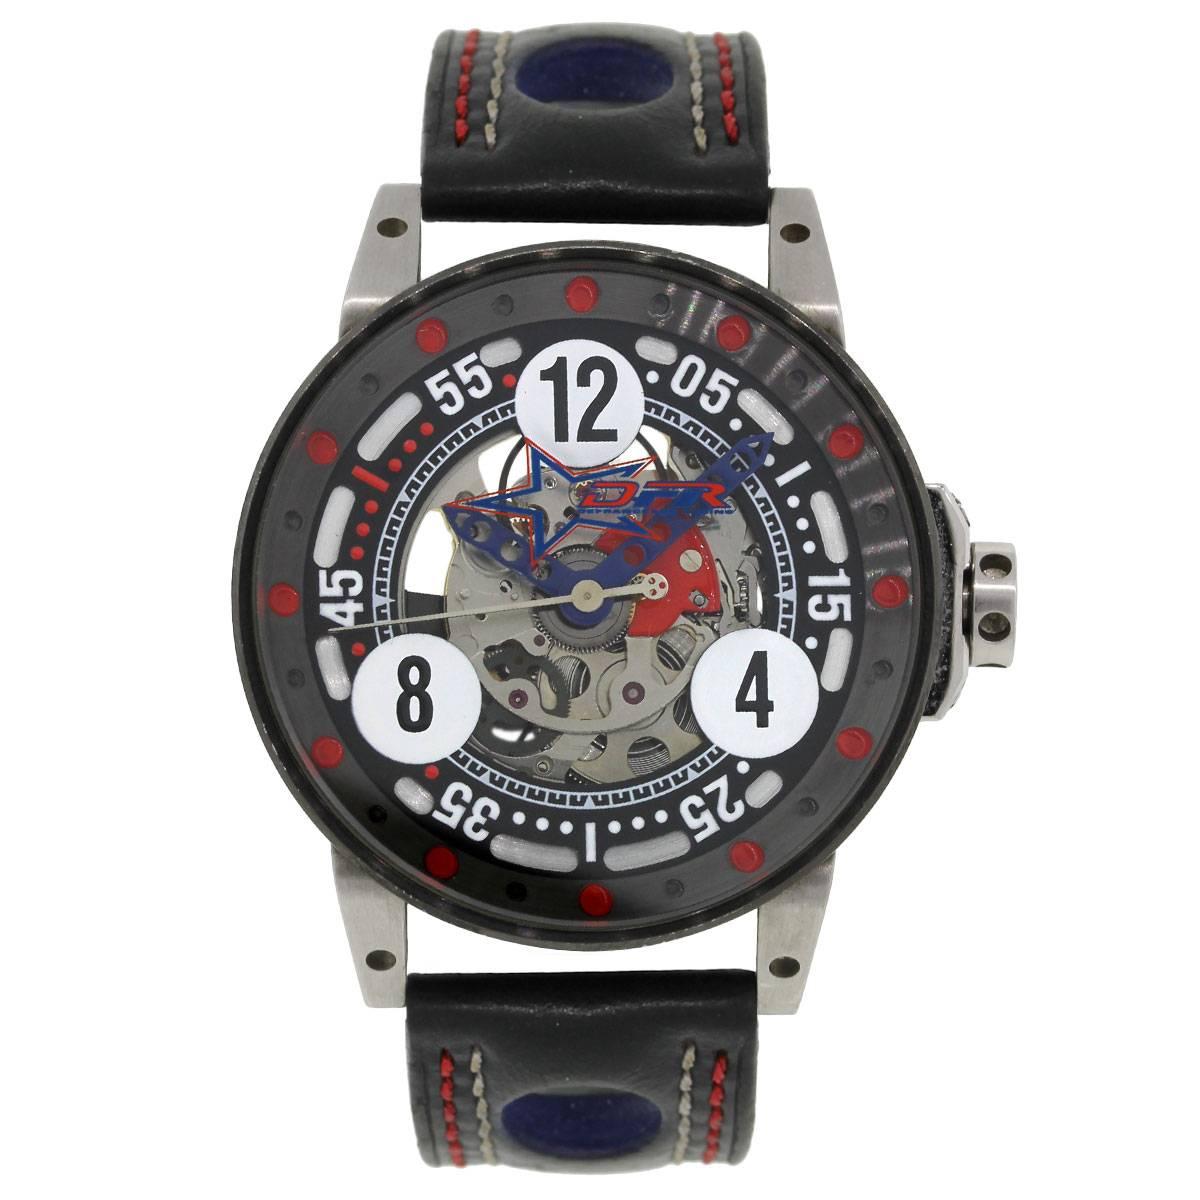 Brand: Bernard Richards Manufactures
MPN: V6-046
Model: Defrancesco Racing
Case Material: Stainless Steel
Case Diameter: 44mm
Bezel: Smooth
Dial: Skeleton dial
Bracelet: Black and blue leather strap with red and white stitching
Crystal: